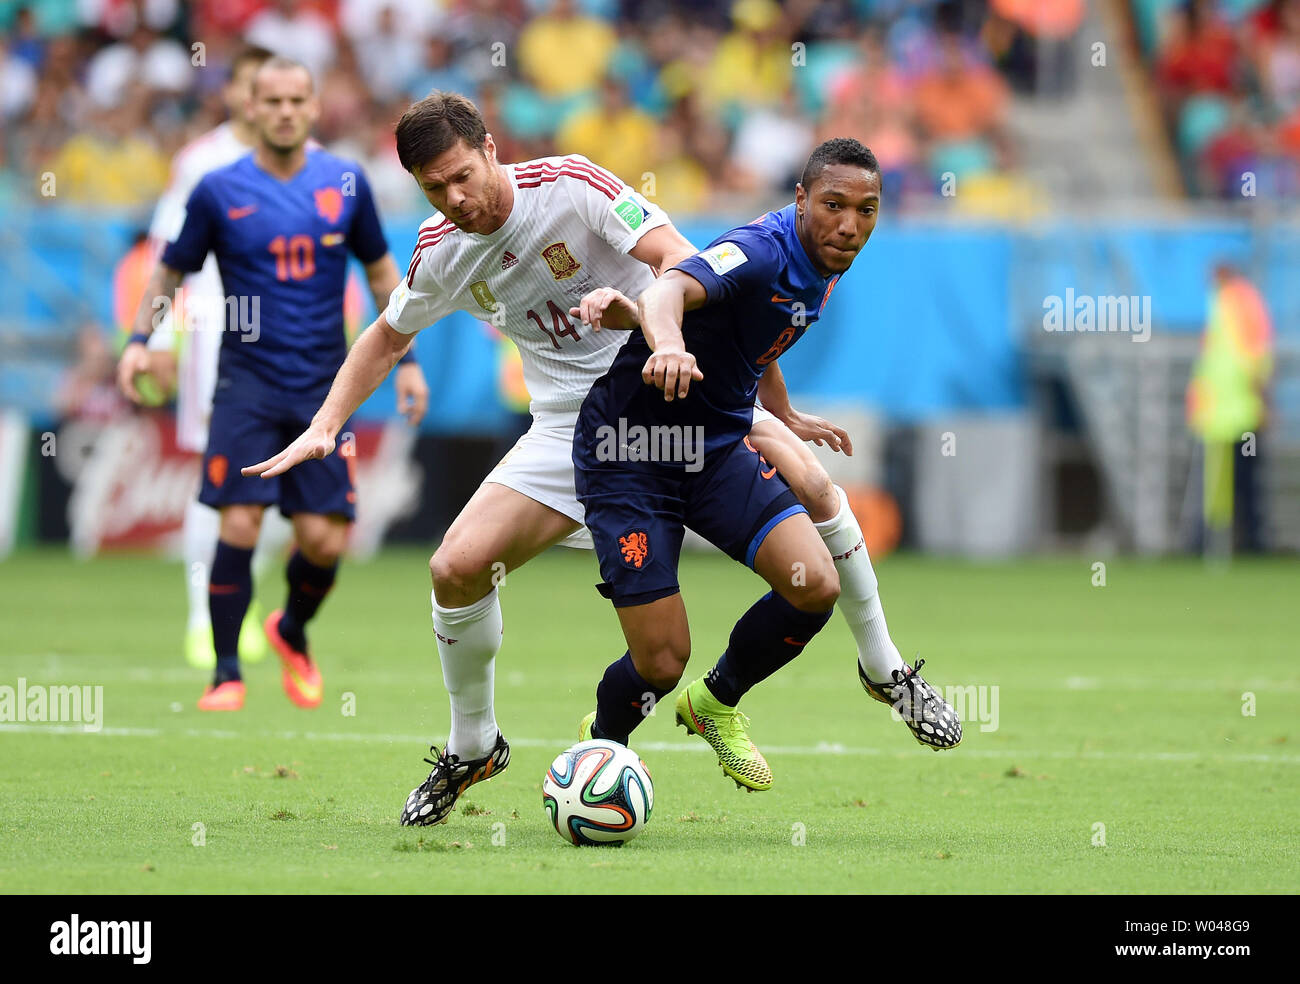 Xabi Alonso of Spain (L) competes with Jonathan De Guzman of the Netherlands during the 2014 FIFA World Cup Group B match at the Arena Fonte Nova in Salvador, Brazil on June 13, 2014. UPI/Chris Brunskill Stock Photo